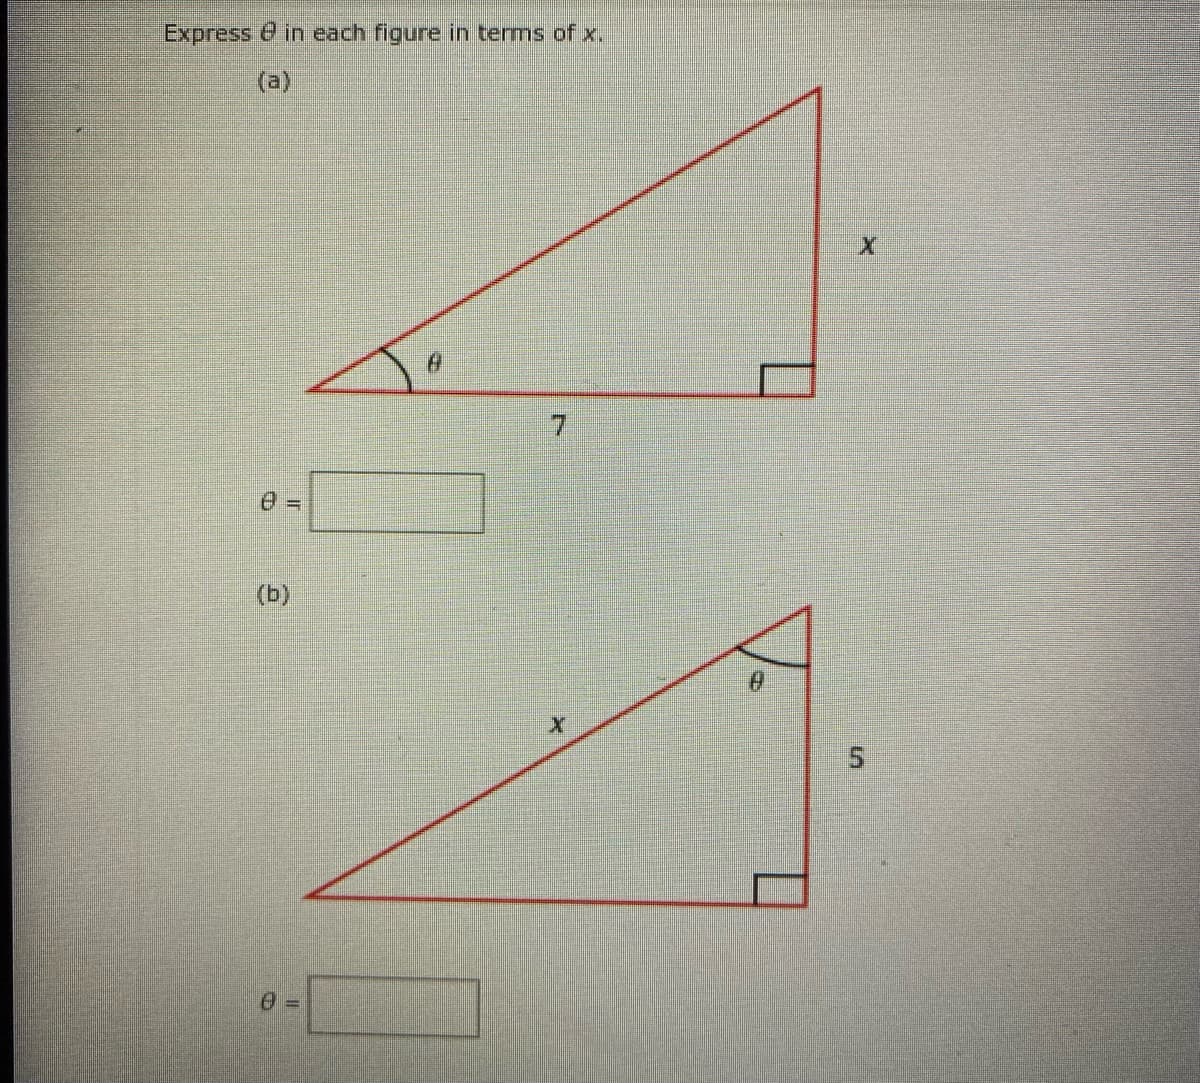 Express @ in each figure in terms of x.
(a)
(b)
5,
